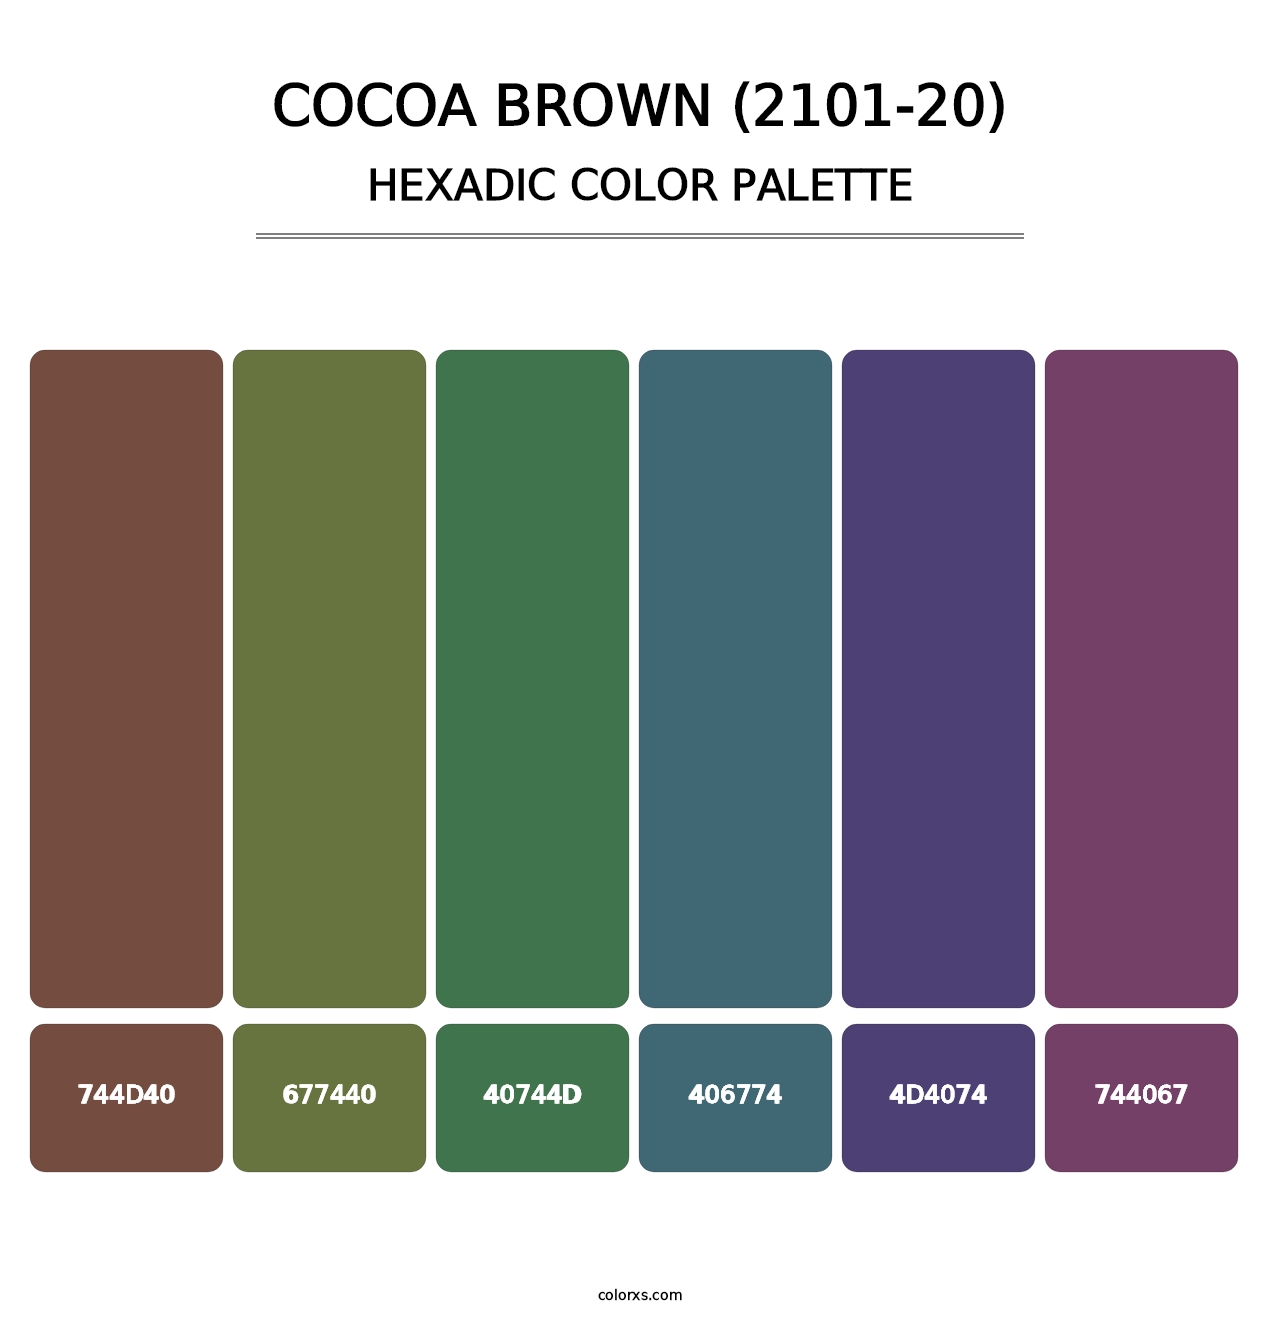 Cocoa Brown (2101-20) - Hexadic Color Palette